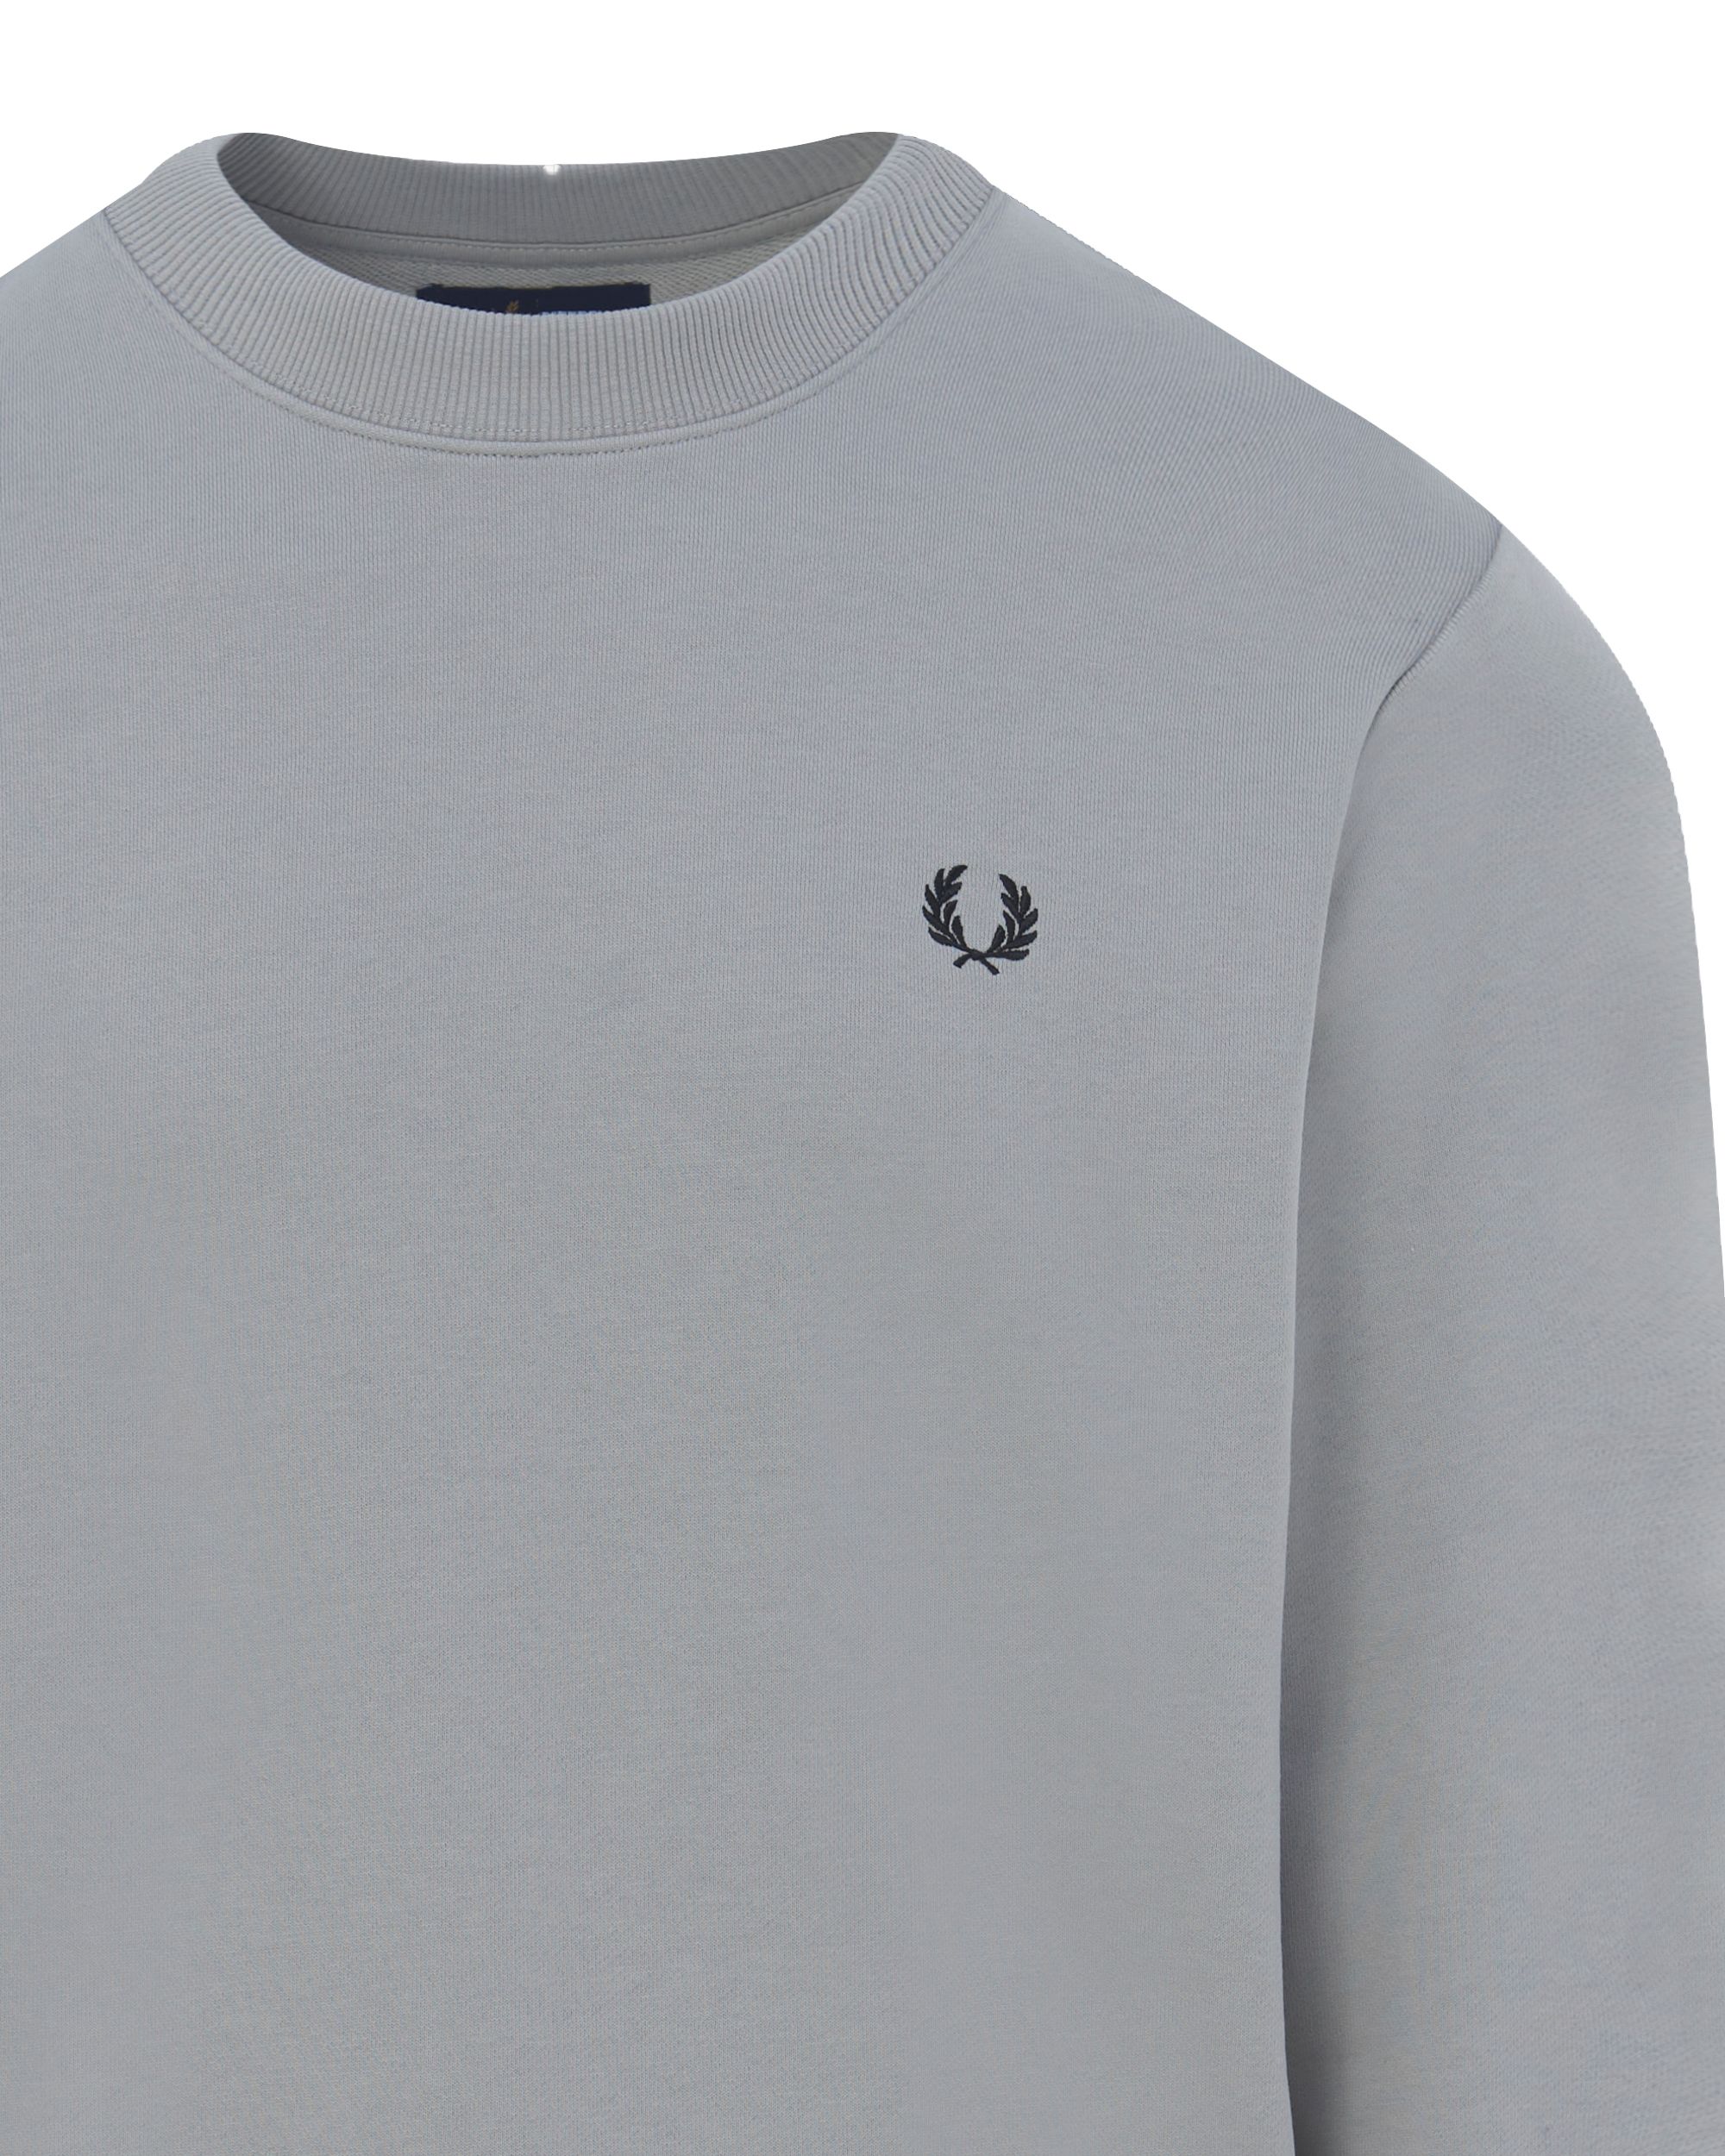 Fred Perry Sweater Grijs 086980-001-L